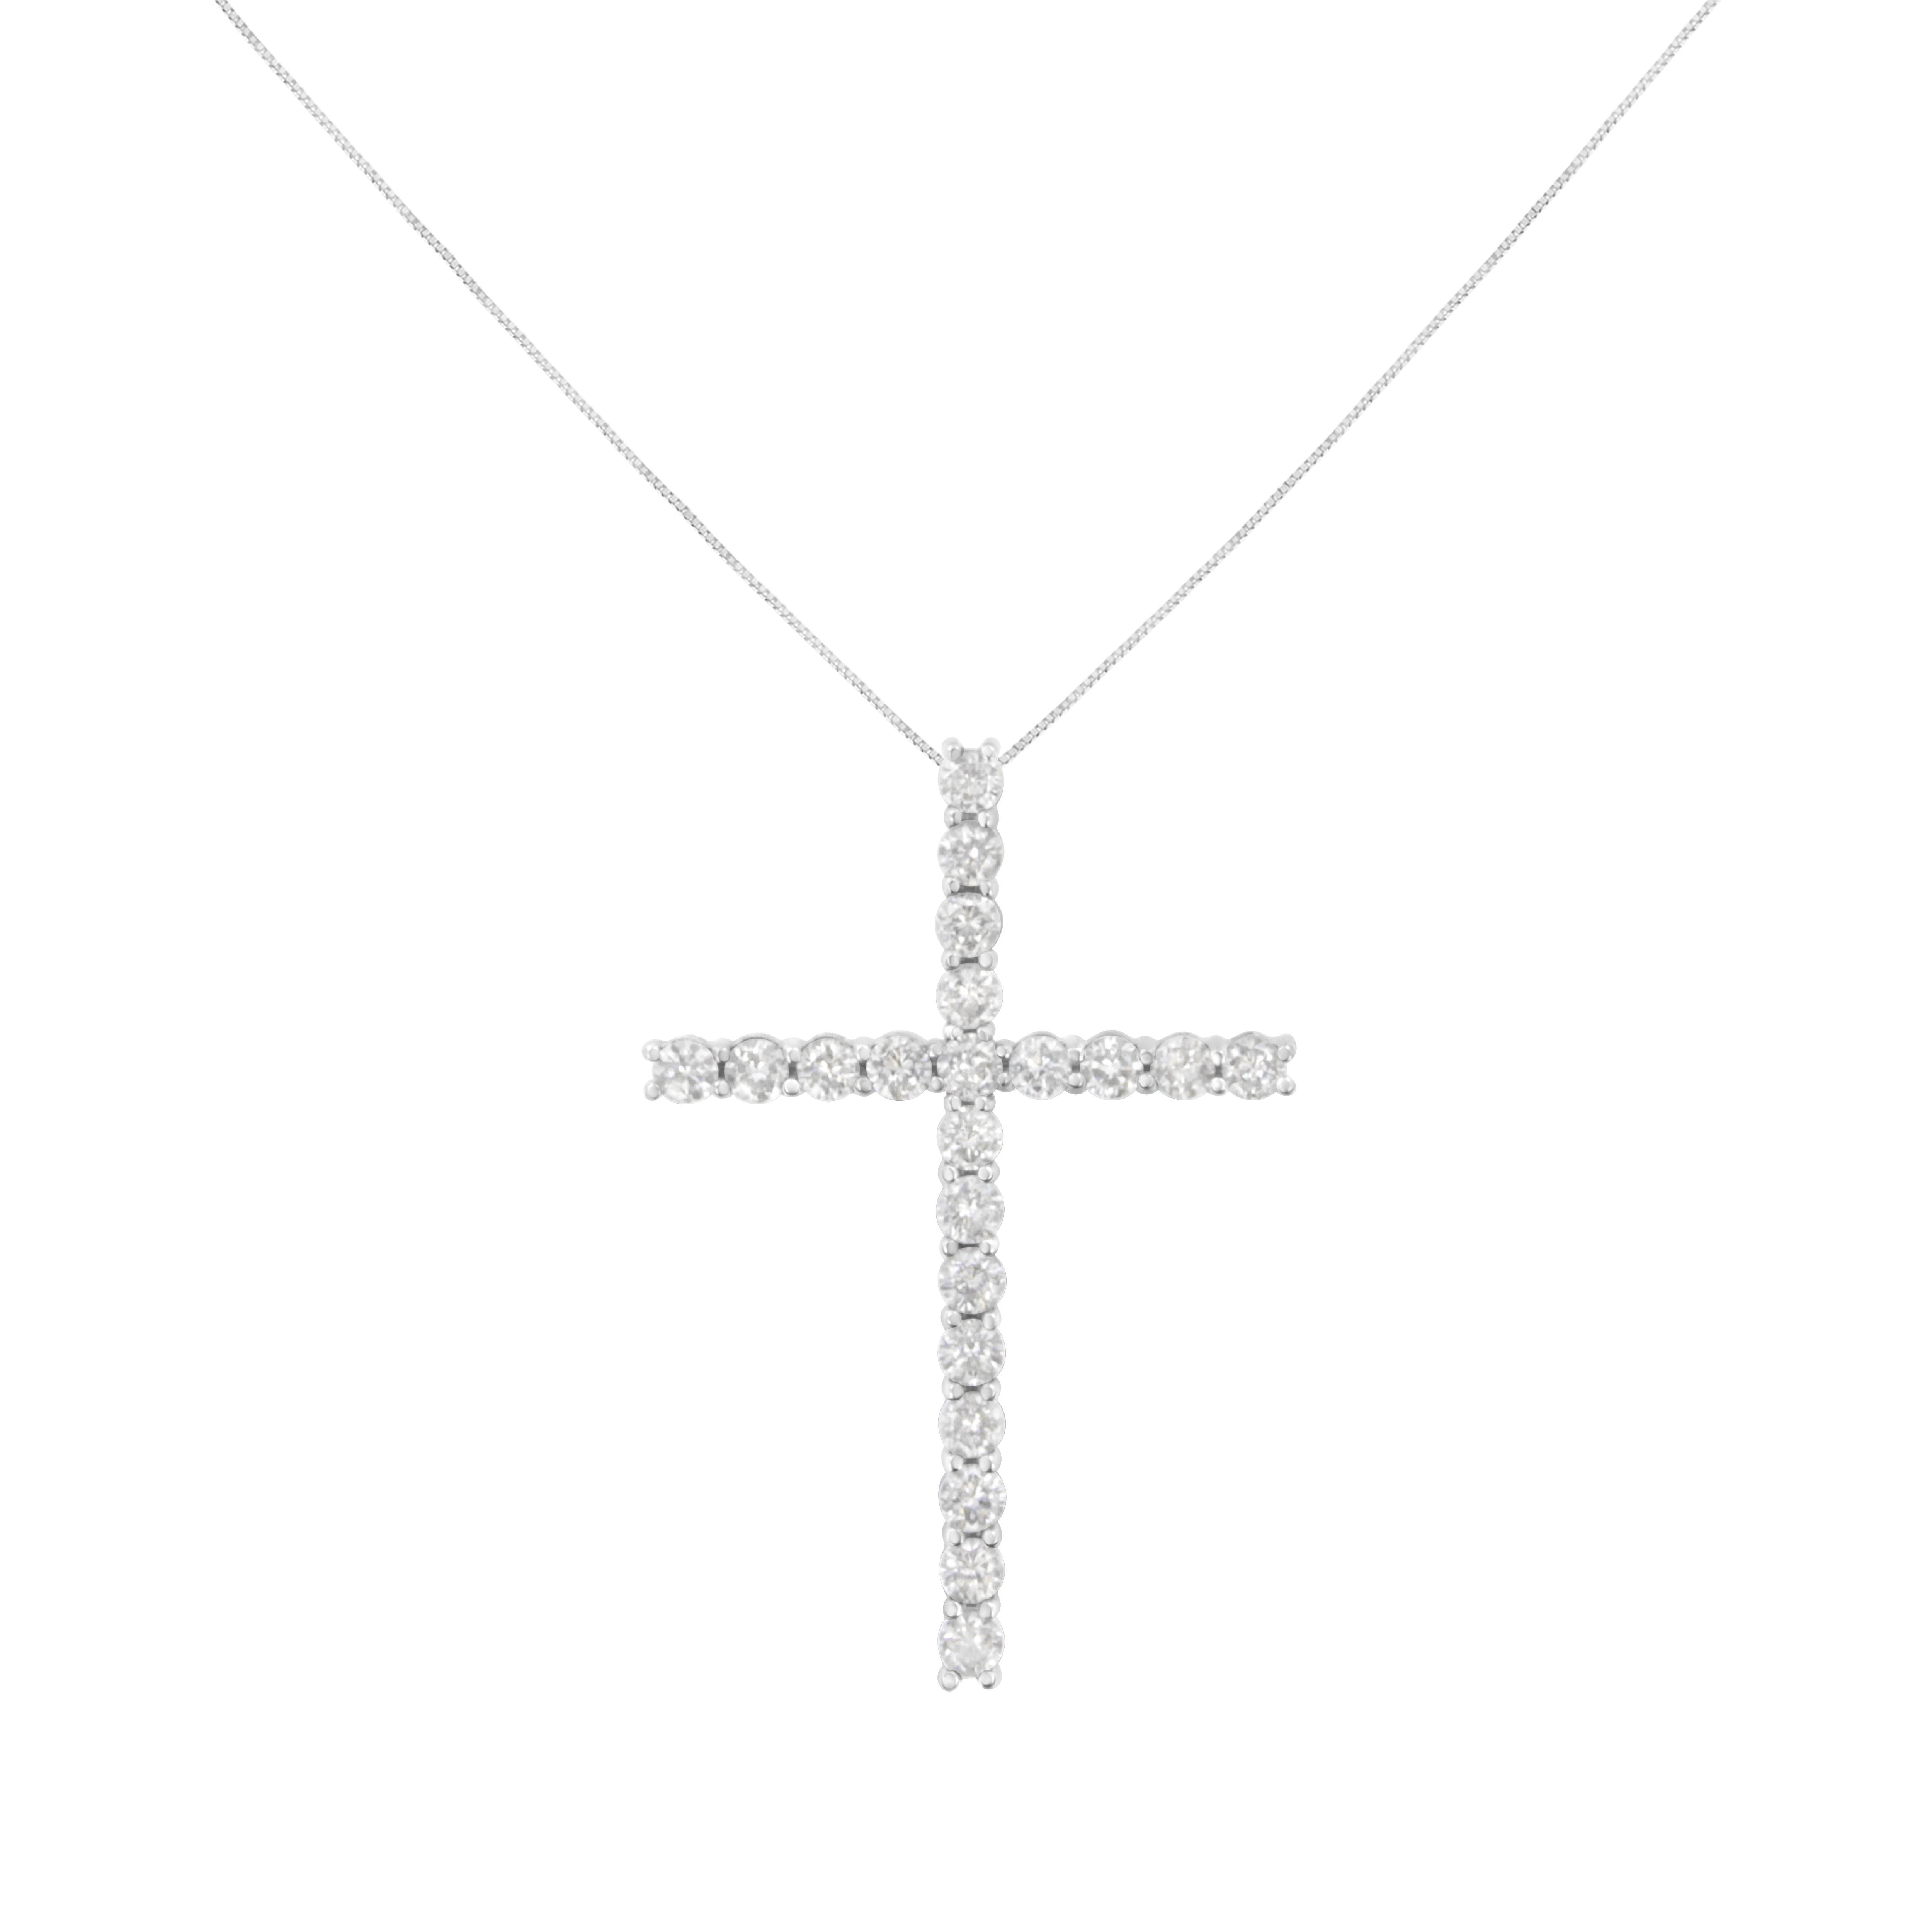 Let your faith shine through with this stunning sterling silver cross pendant. An elegant display of belief, this beautiful piece is composed of 21 natural round-cut diamonds in a prong setting. Comes with an 18